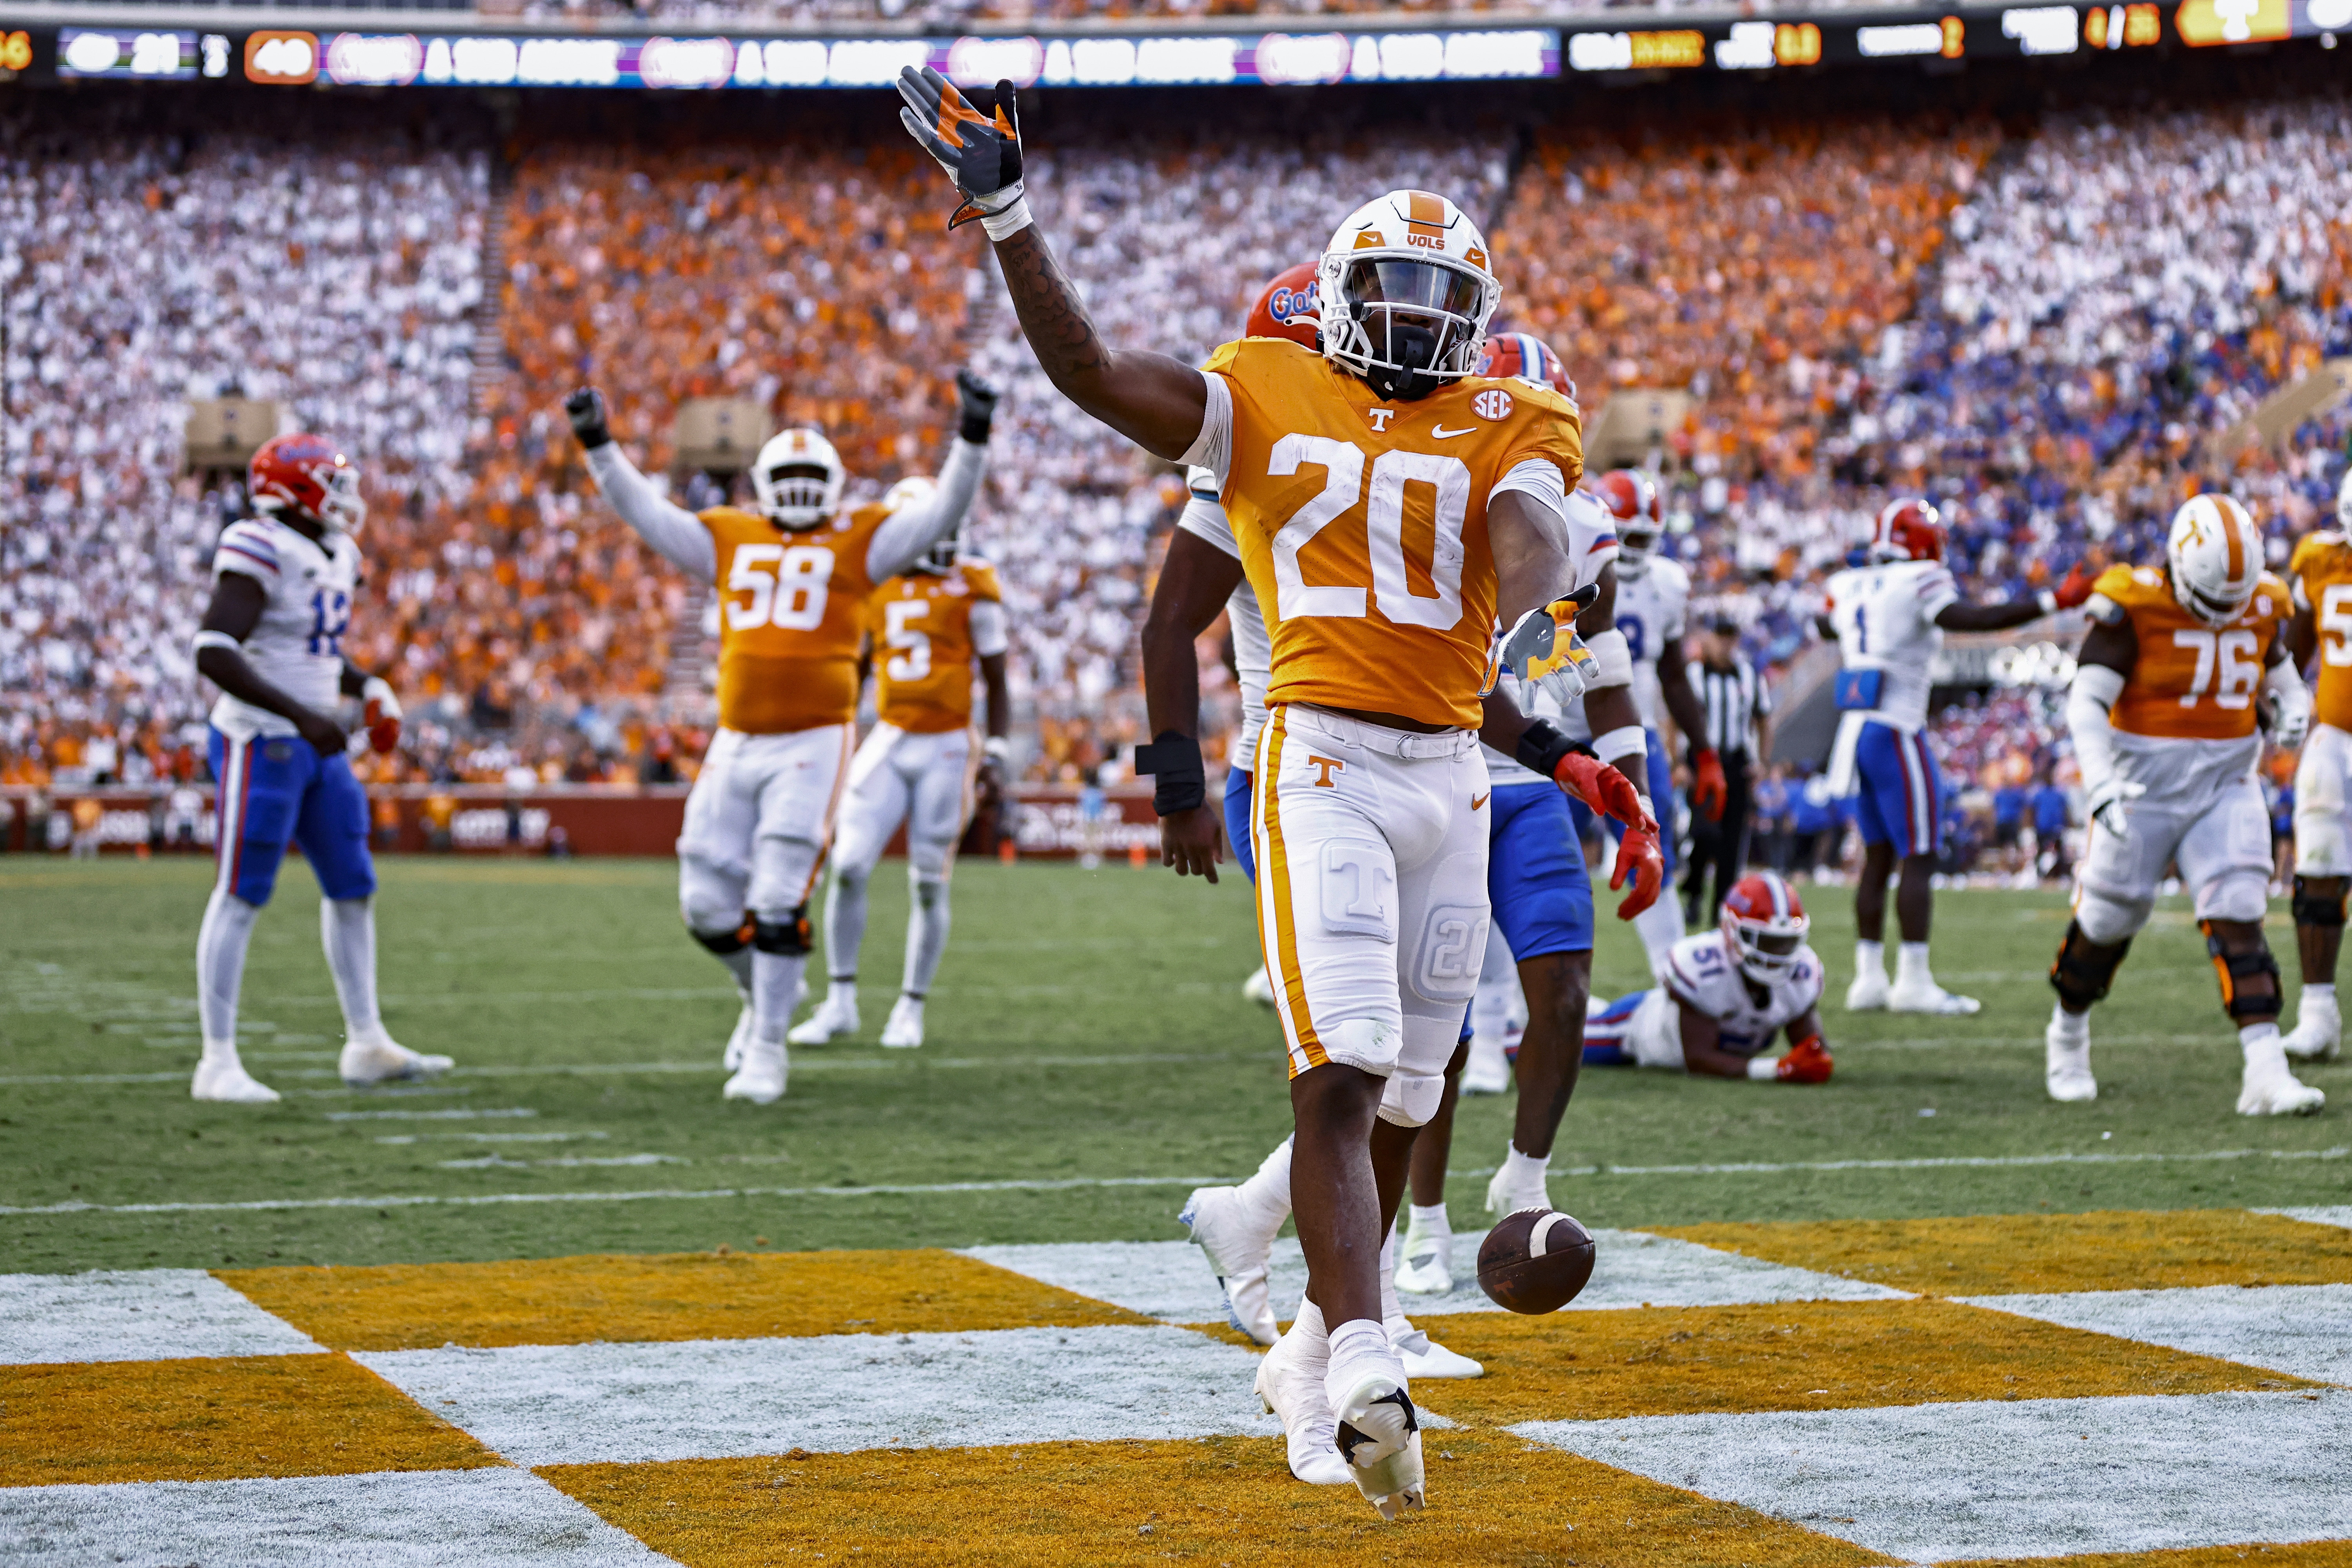 8 Black starting quarterbacks in the AP Top 25: 8. Tennessee (No. 25)